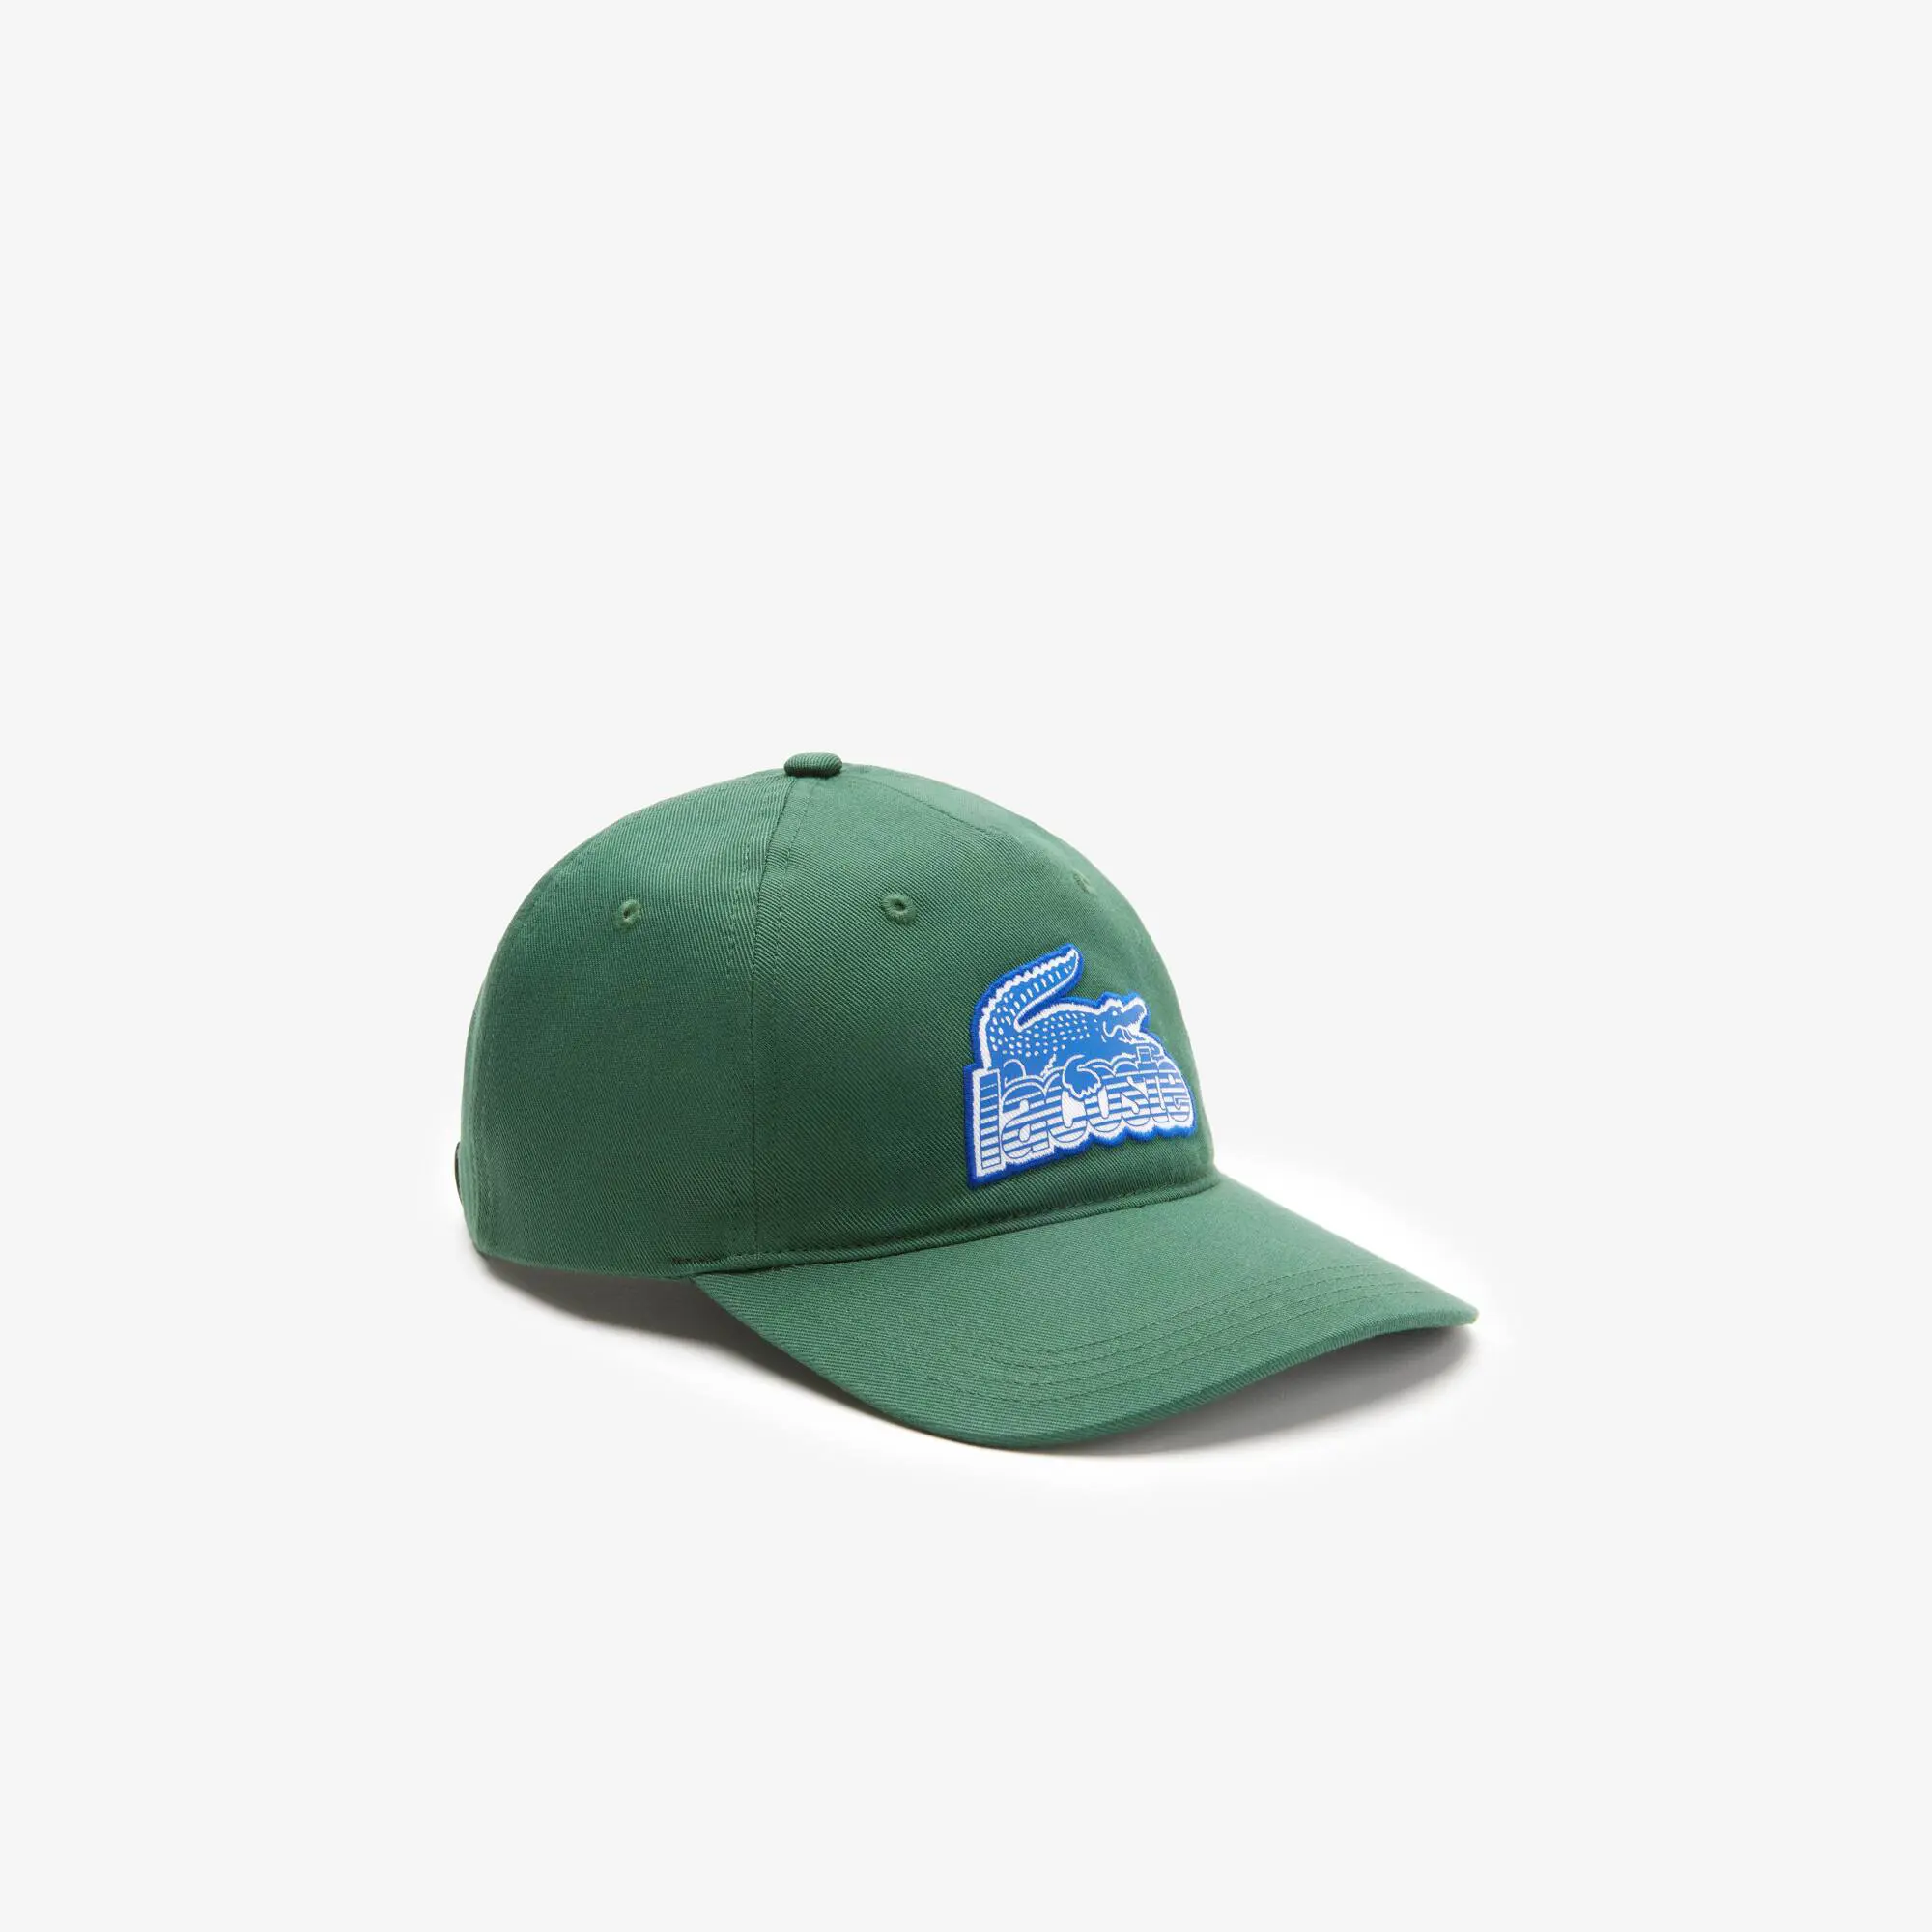 Lacoste Unisex Lacoste cap with crocodile patch and branding. 1